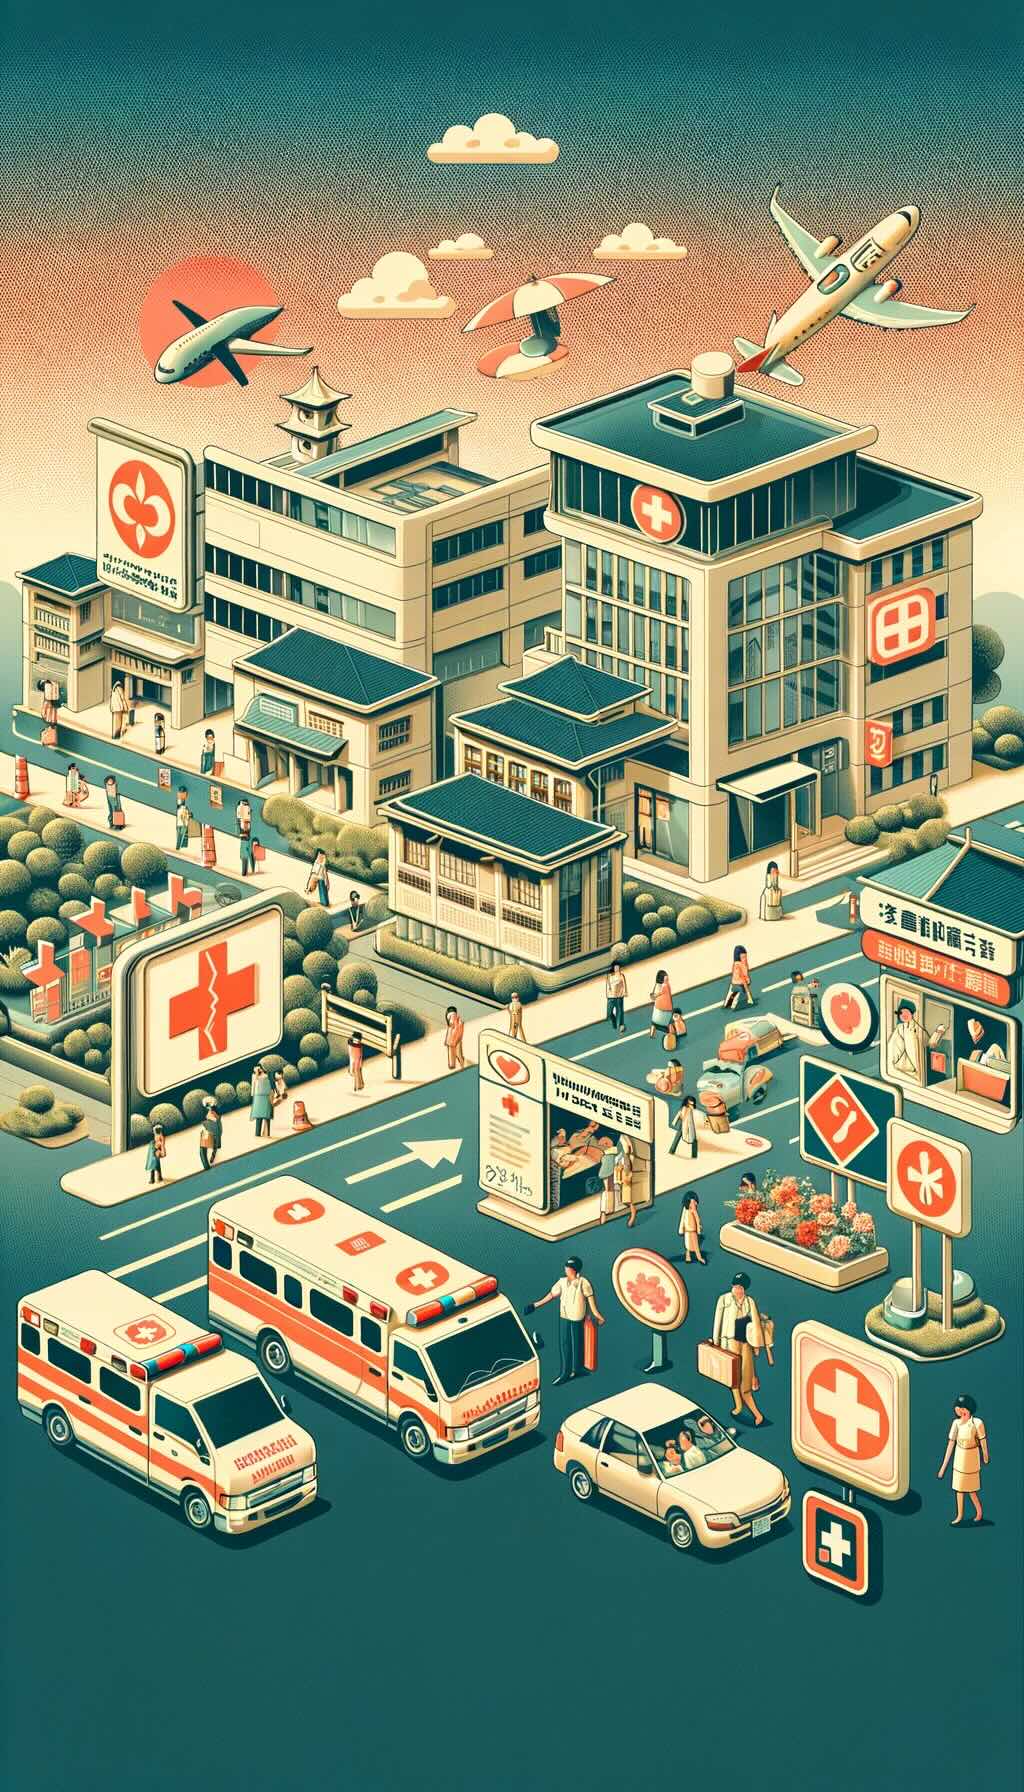 Healthcare and medical safety in Japan for tourists depicts various aspects of Japan's healthcare system, including modern hospitals, clinics, pharmacies, and the ambulance service. It visualizes scenes showing tourists interacting with healthcare professionals and emphasizes the importance of travel health insurance. The image includes elements representing common health concerns and prevention, like signs for heatstroke and insect repellent. The overall composition captures the harmony and efficiency of Japan's healthcare system, with the retro fade style adding a touch of nostalgia and warmth to the depiction of medical facilities and services